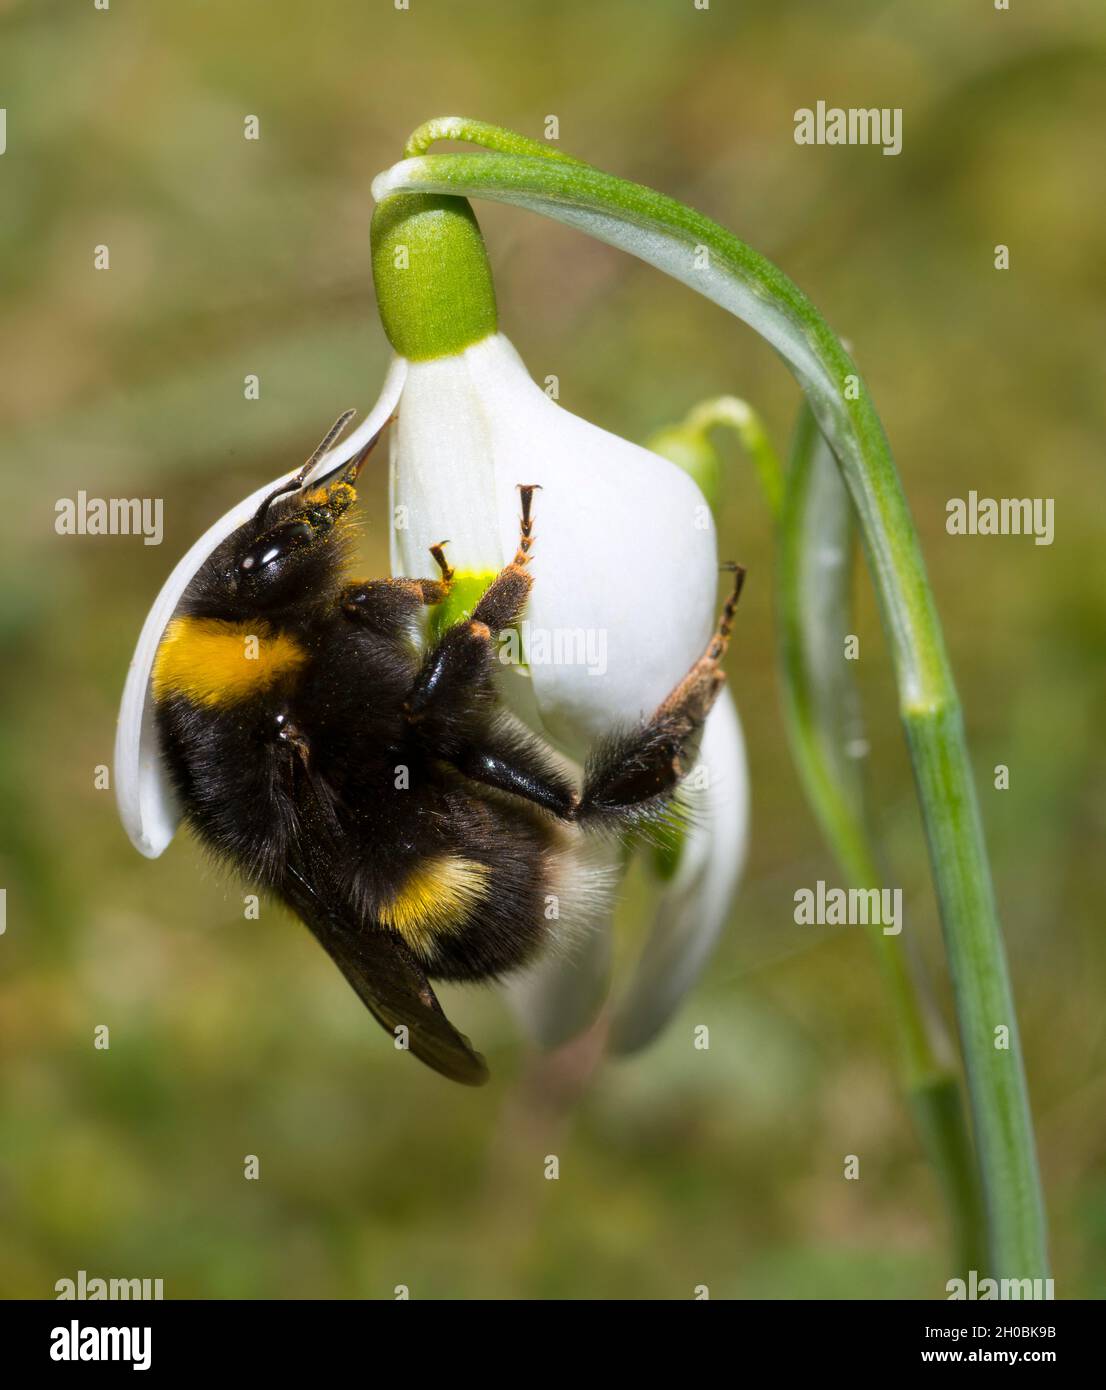 Buff-tailed bumblebee (Bombus terrestris) queen foraging a snowdrop (Galanthus nivalis), Vosges du Nord Regional Nature Park, France Stock Photo